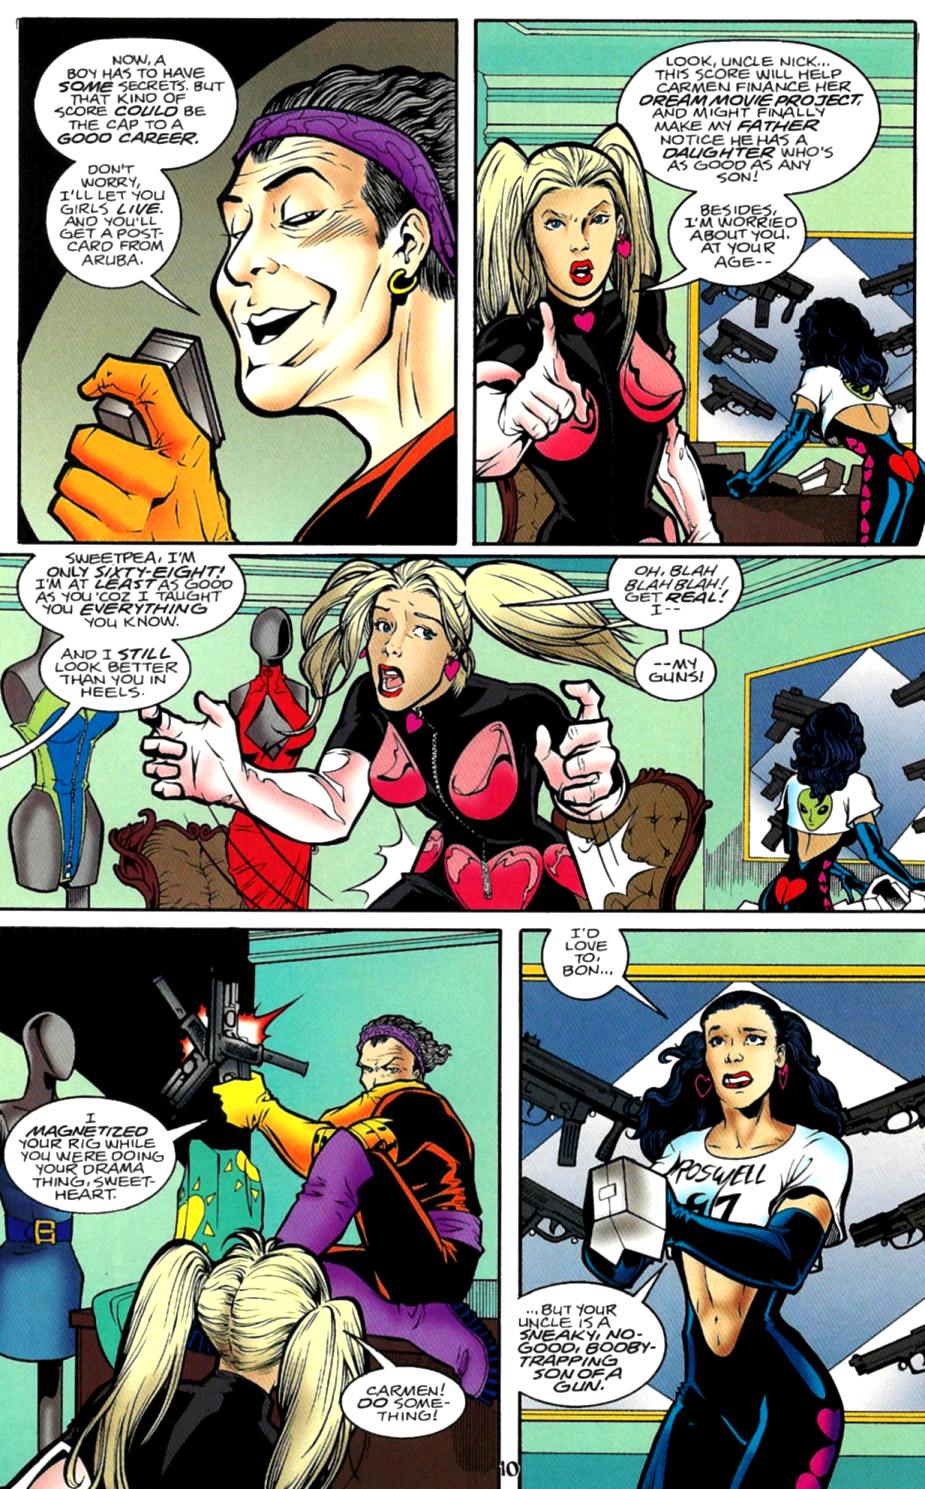 Read online Body Doubles (Villains) comic -  Issue # Full - 11